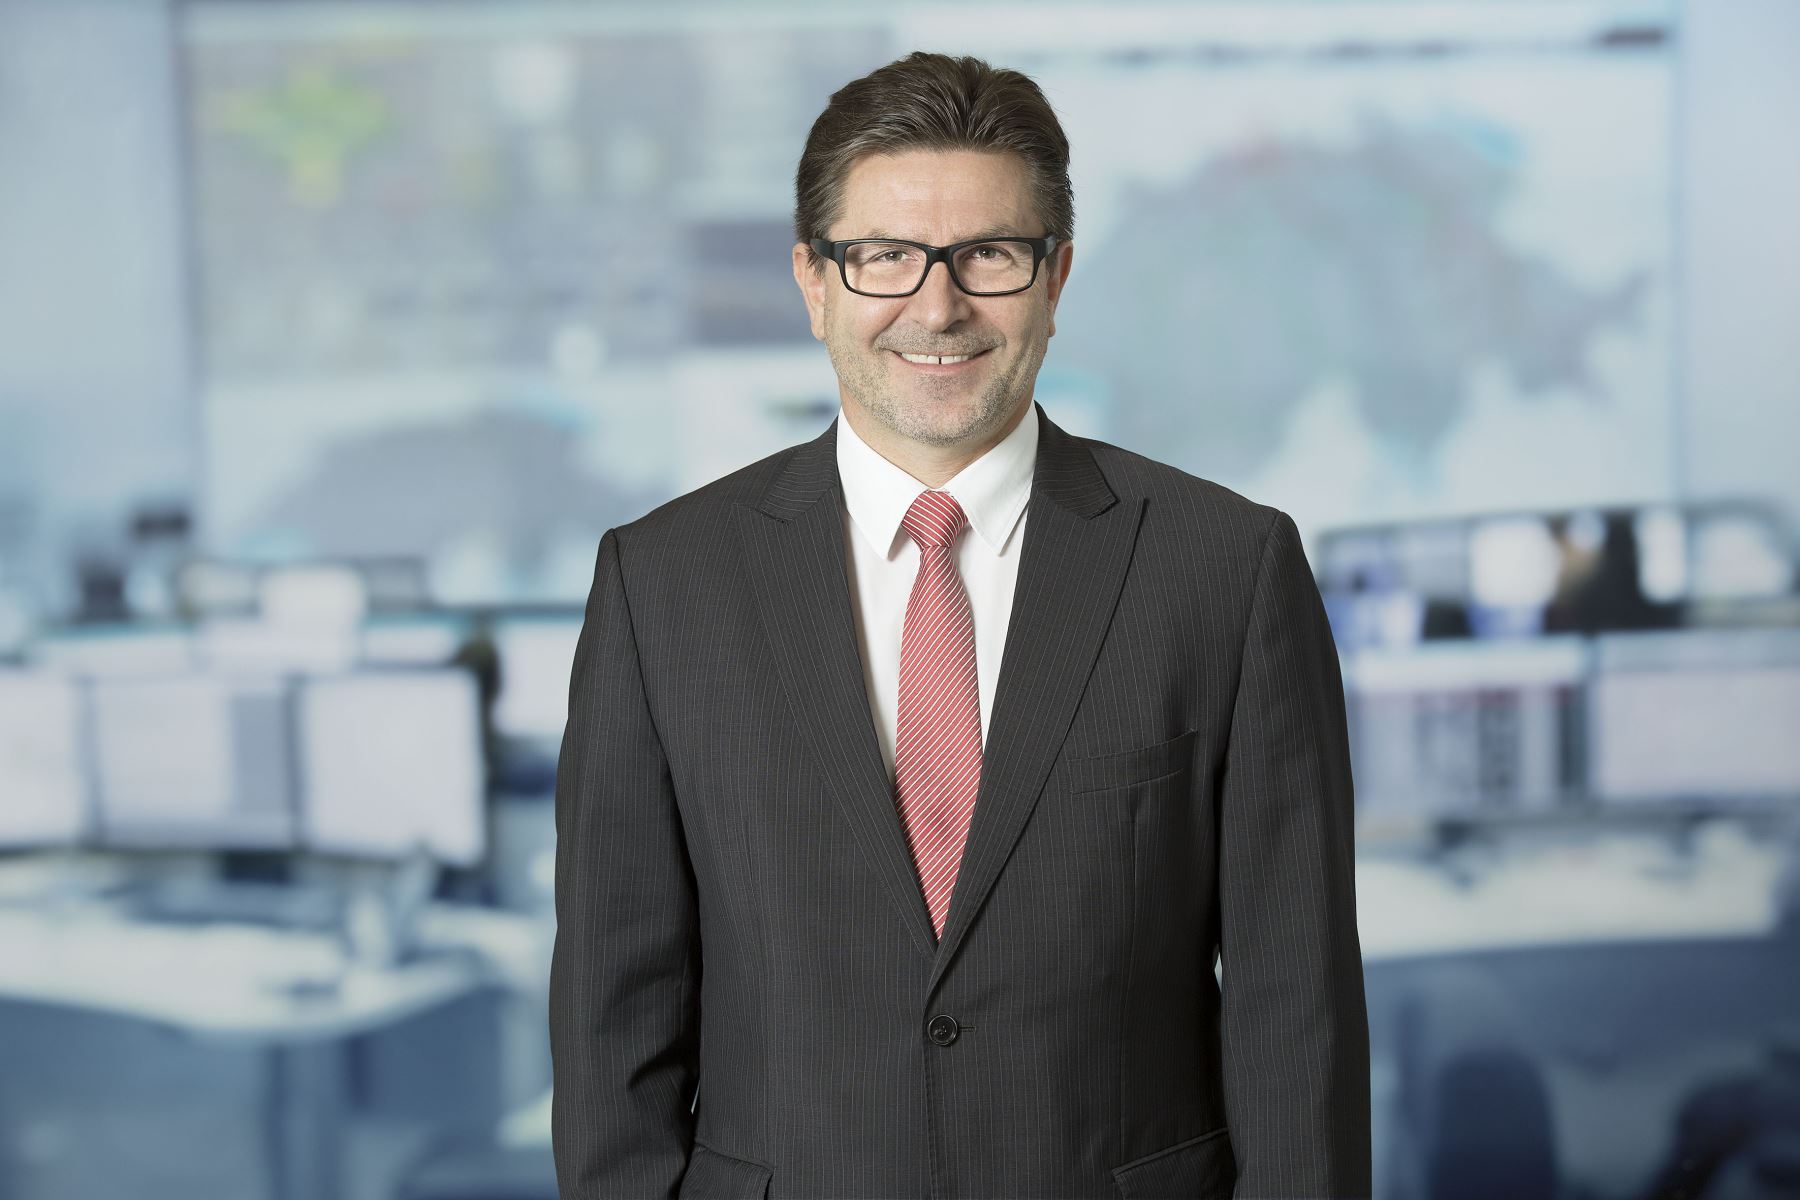 CIGRE > Articles > Q&A with Yves Zumwald, CEO Swissgrid